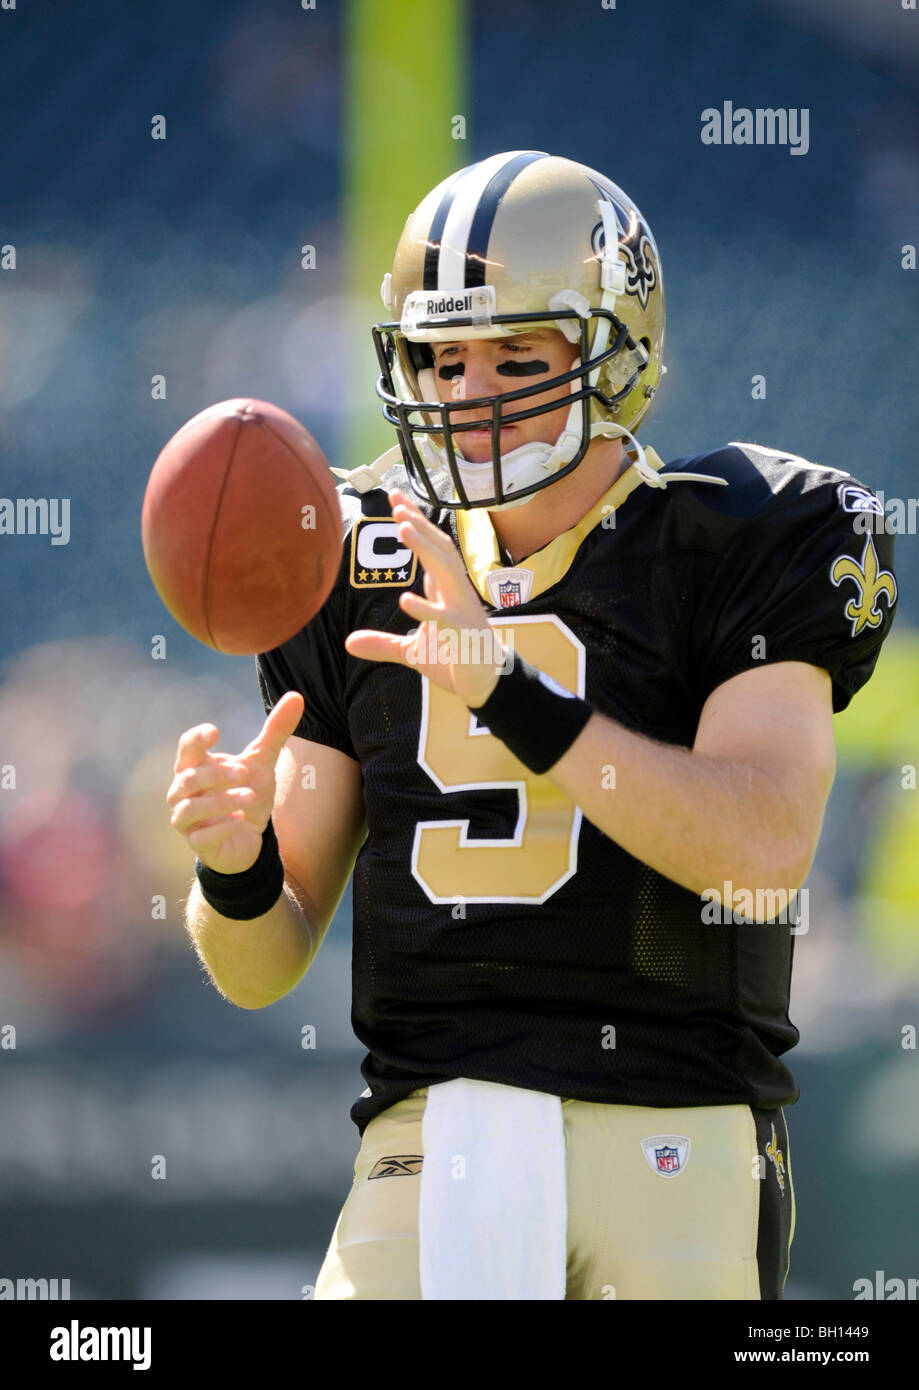 Drew Brees #9 of the New Orleans Saints Stock Photo